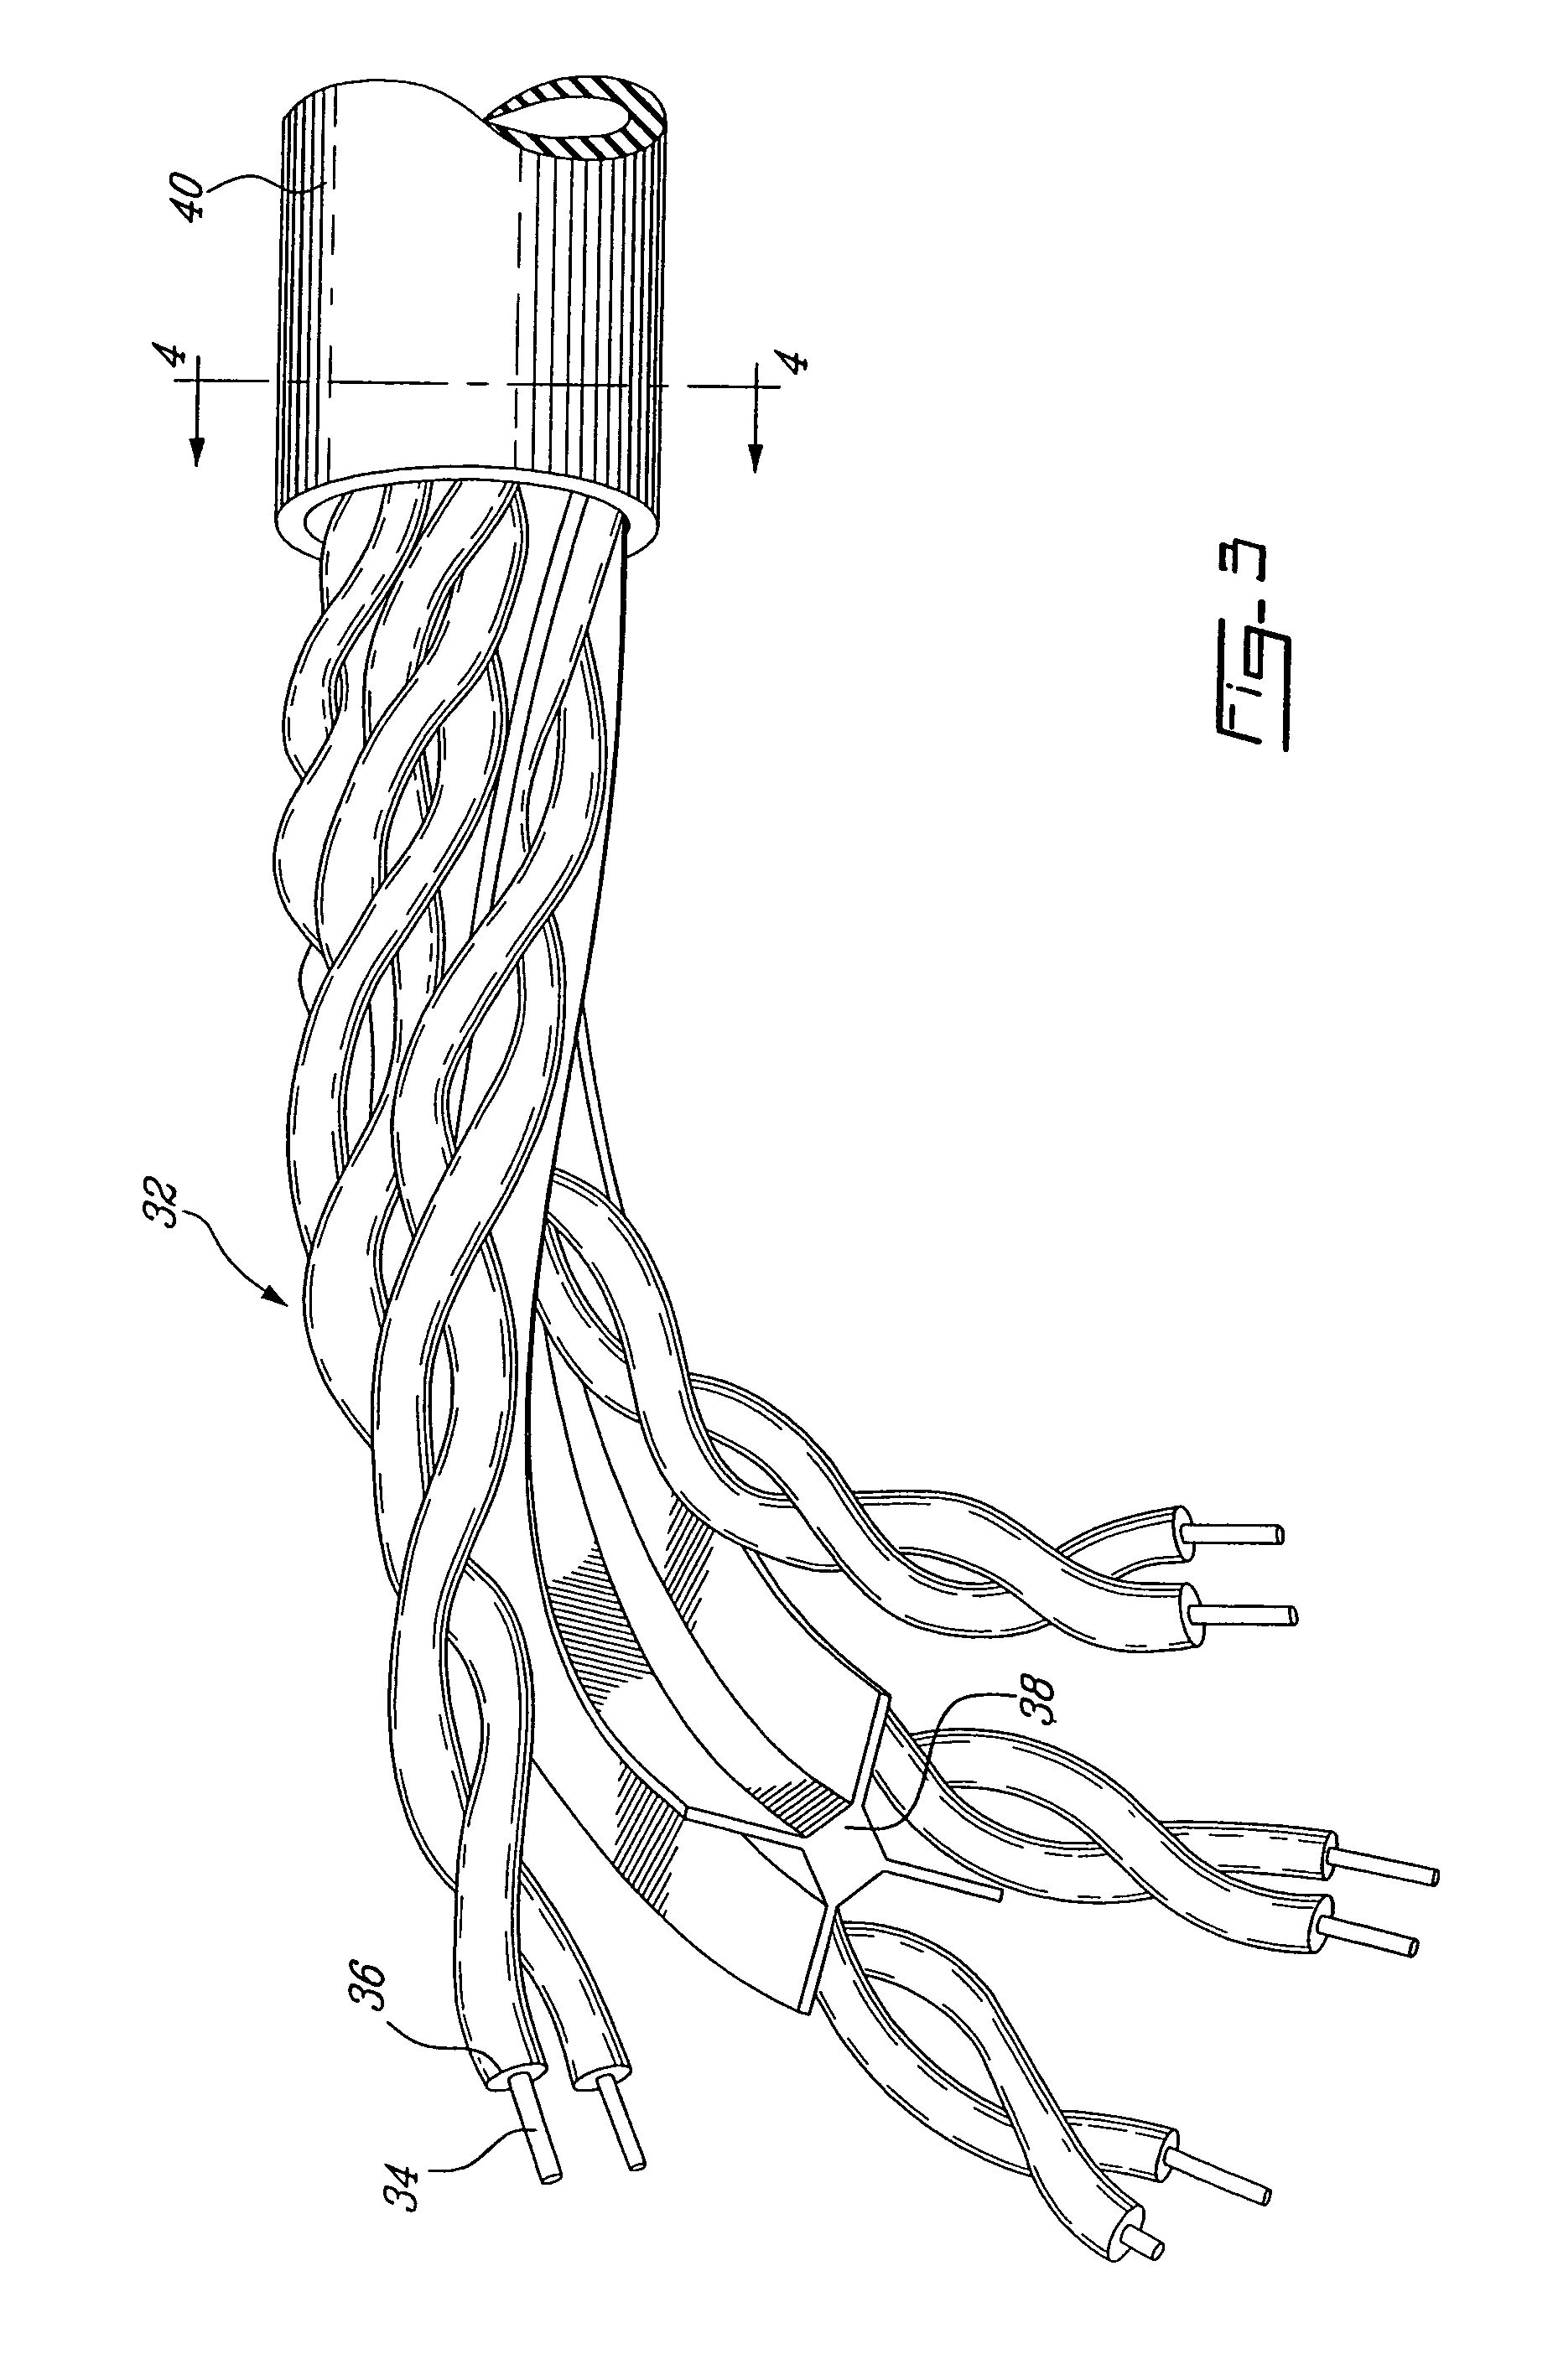 Wire lead guide and method for terminating a communications cable